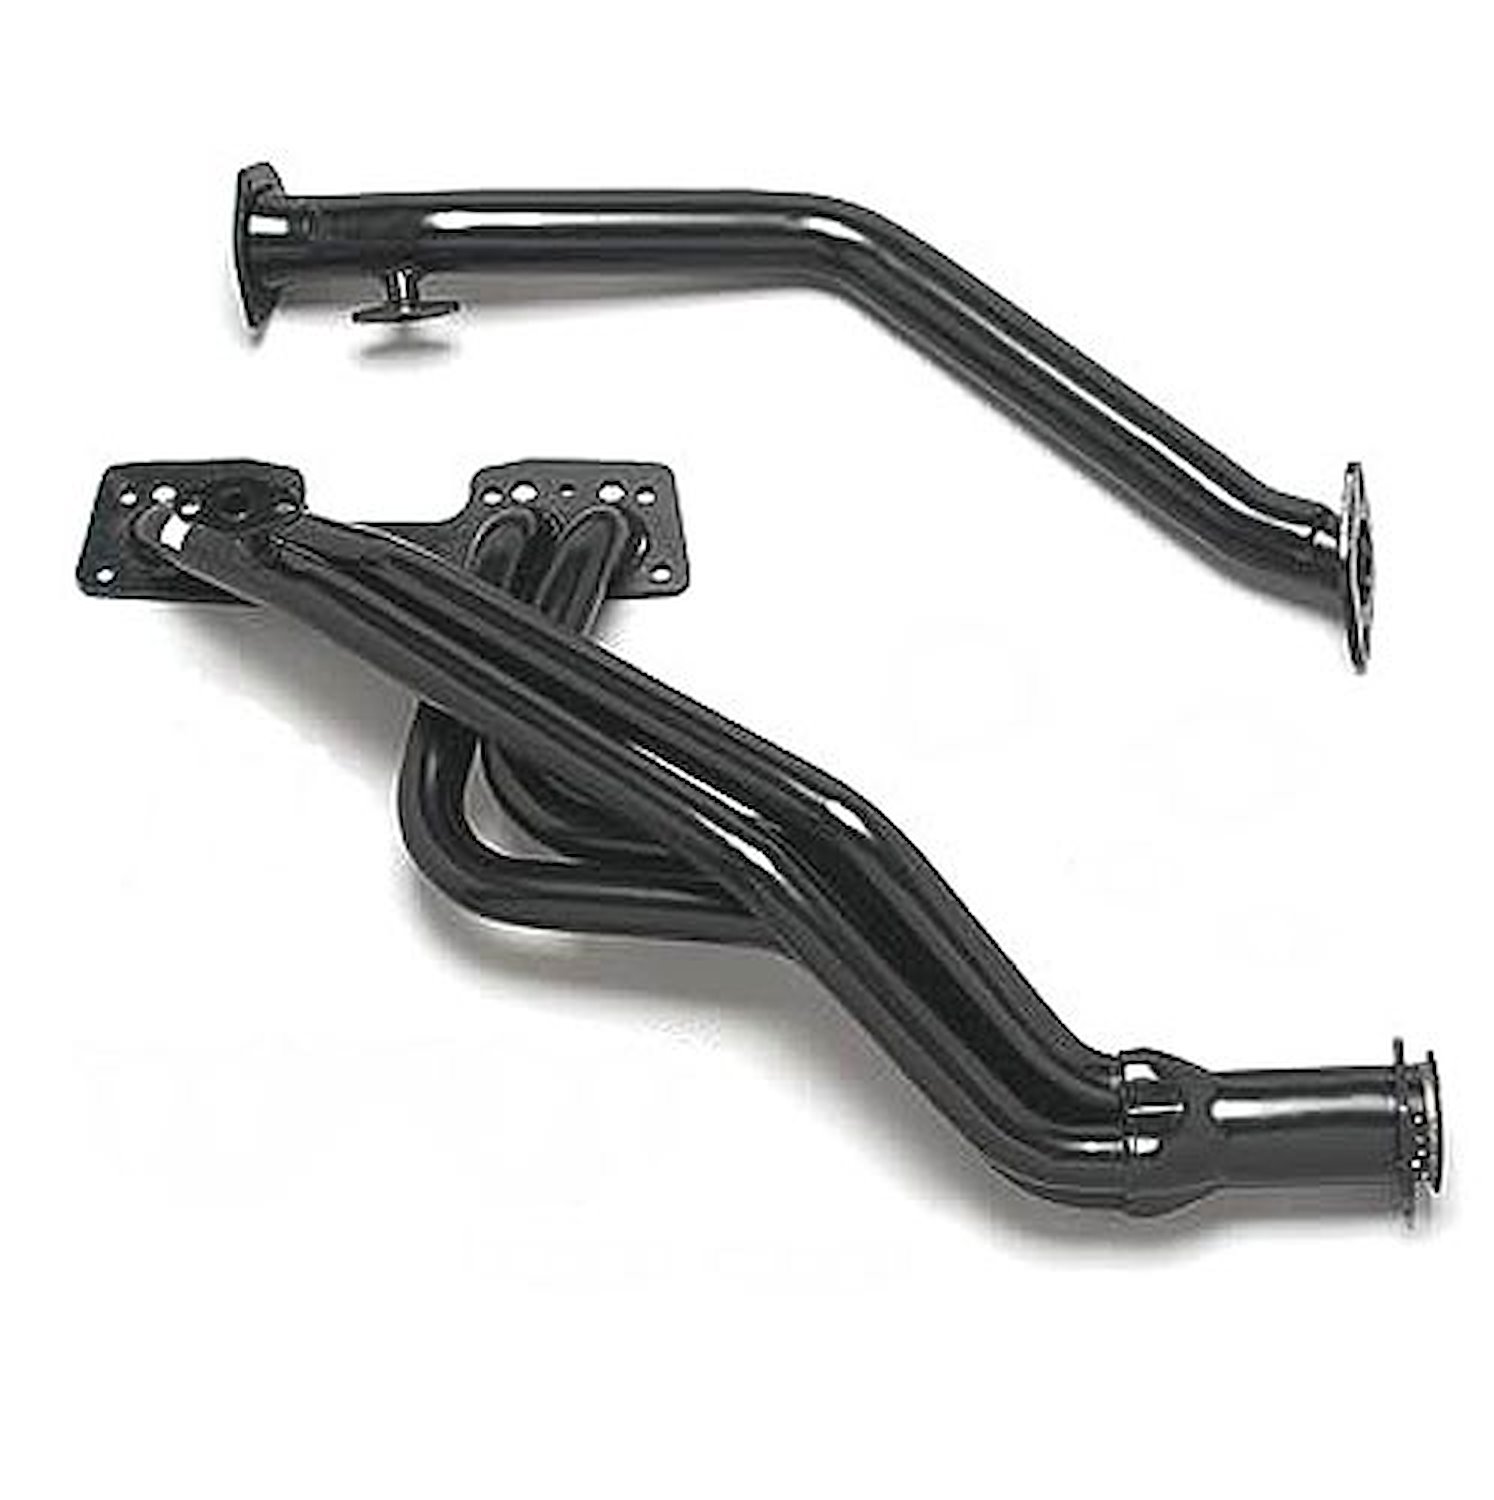 Painted Truck Header 1984-89 Pickup 2WD/4WD and 4Runner 2.2L/2.4L 4-speed or auto